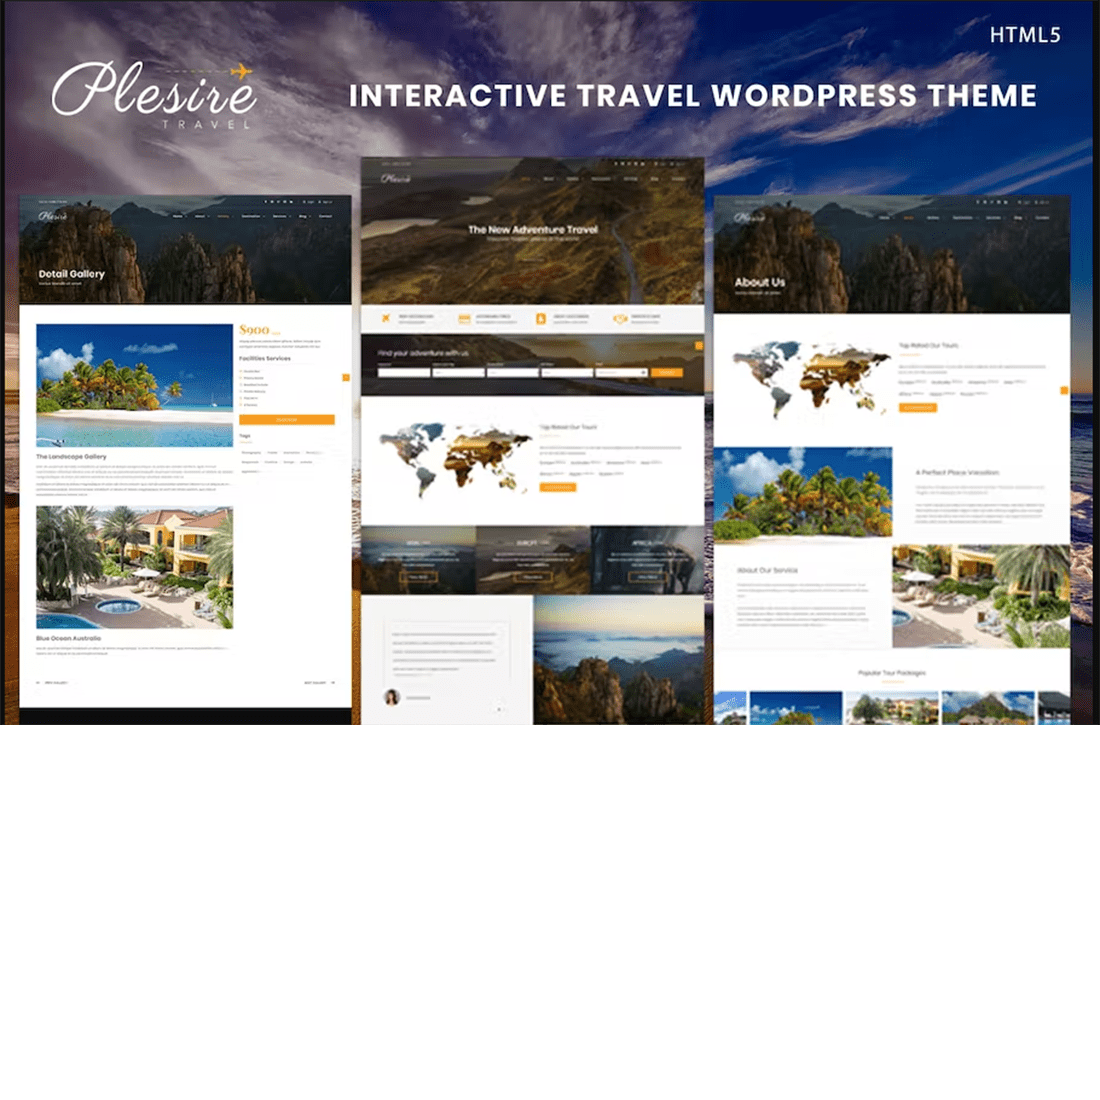 Free Interactive Tour Travel Agency Website Template cover image.